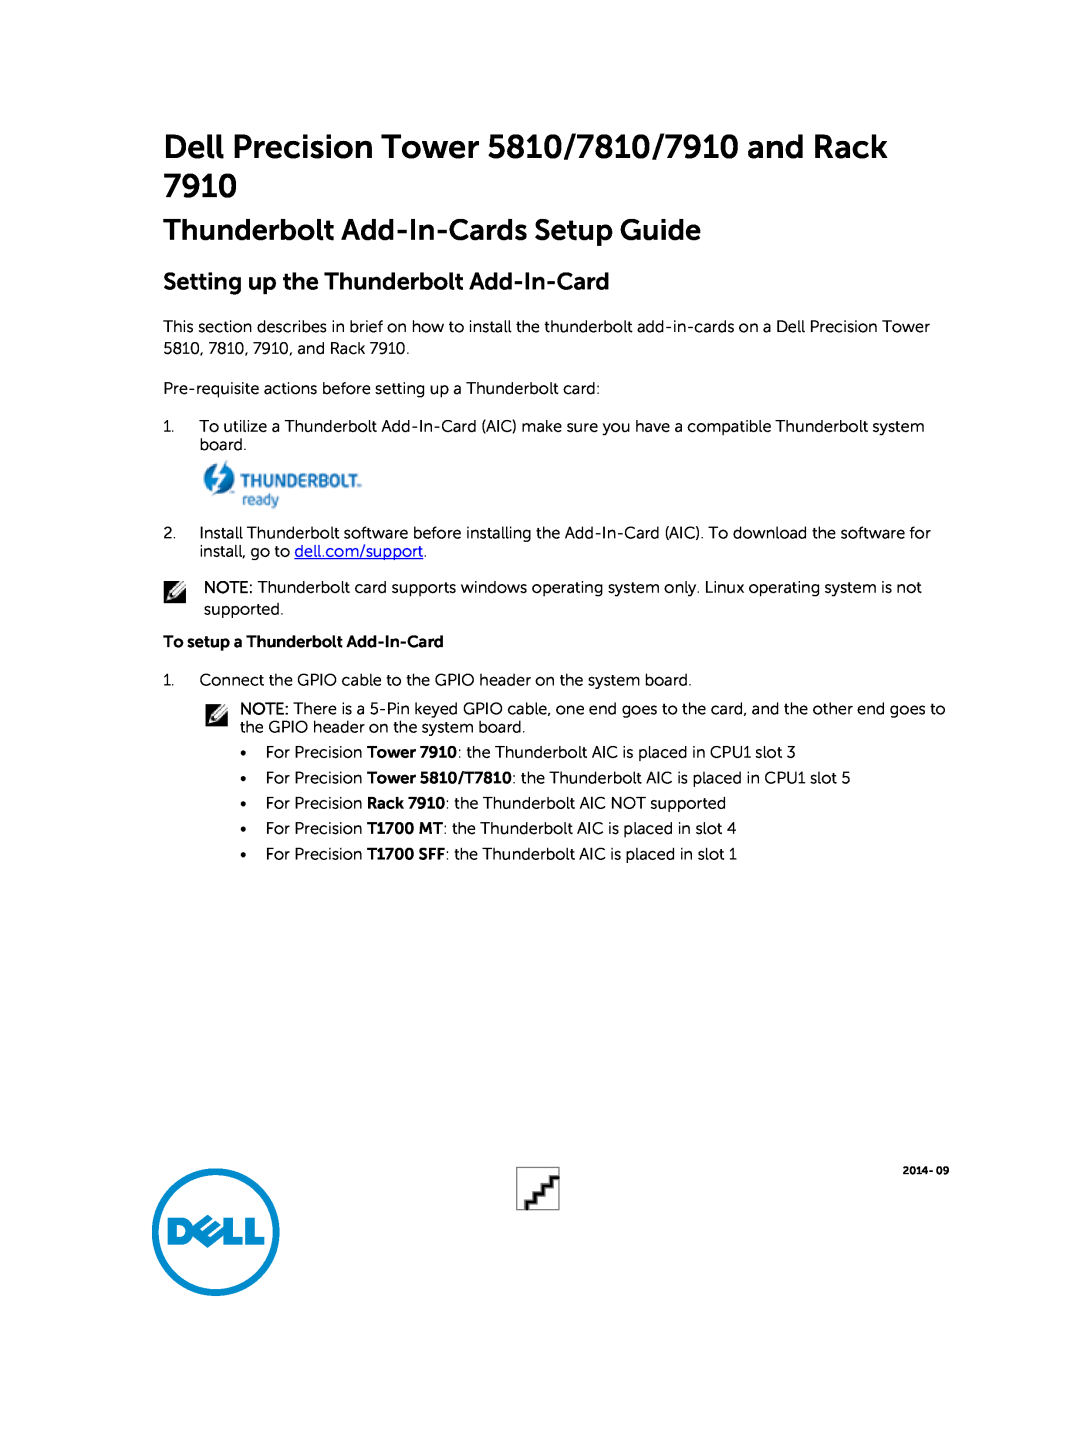 Dell setup guide Thunderbolt Add-In-Cards Setup Guide, Dell Precision Tower 5810/7810/7910 and Rack 